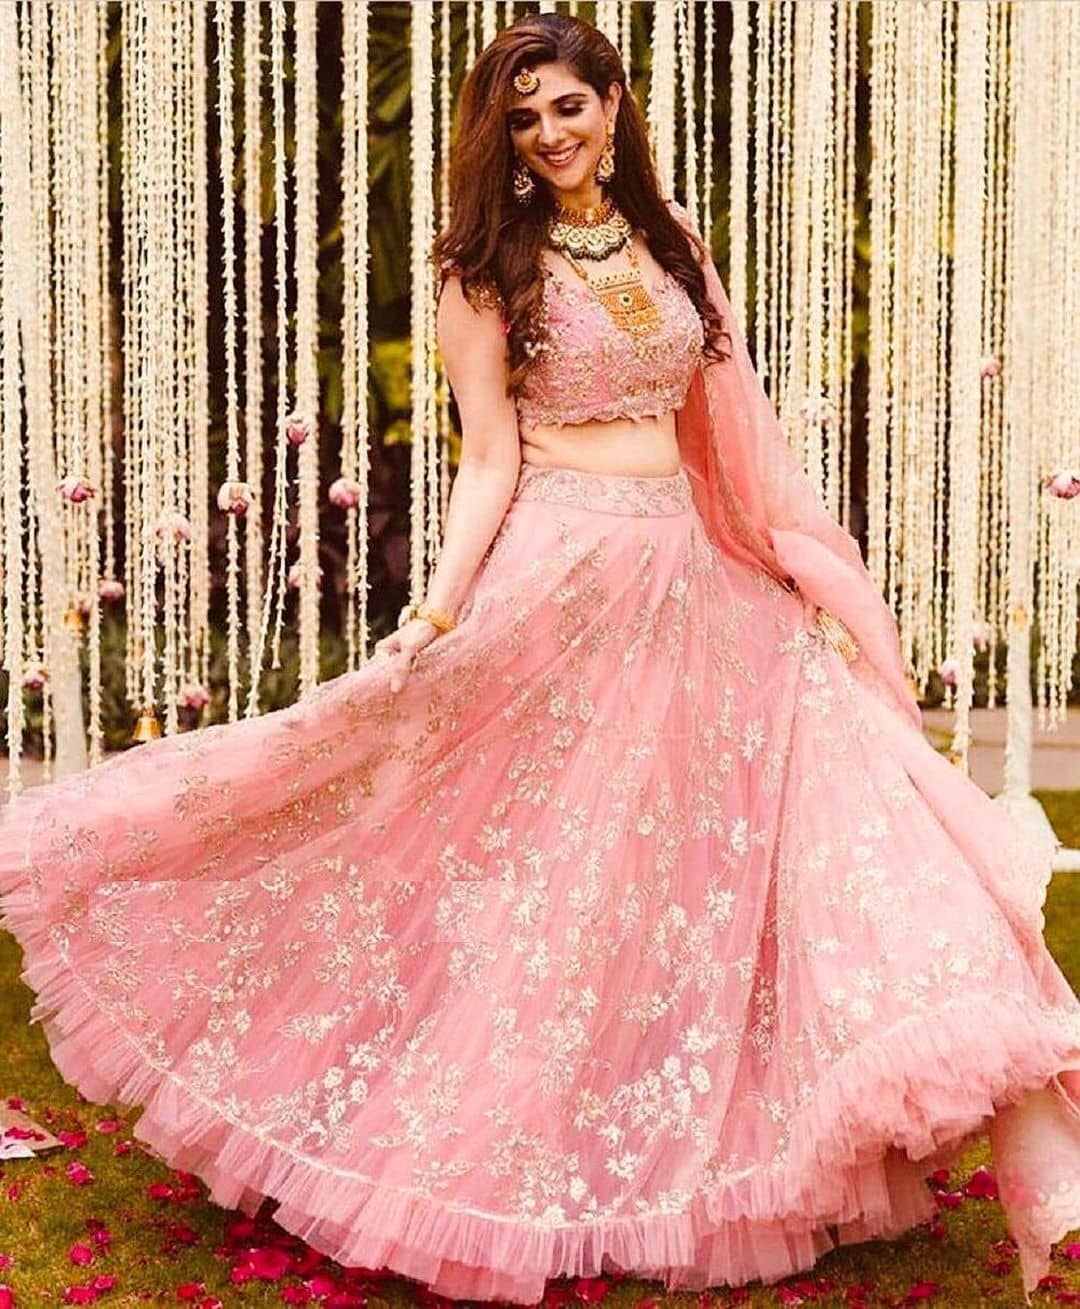 Peachy Pink Lehenga with Lace Details